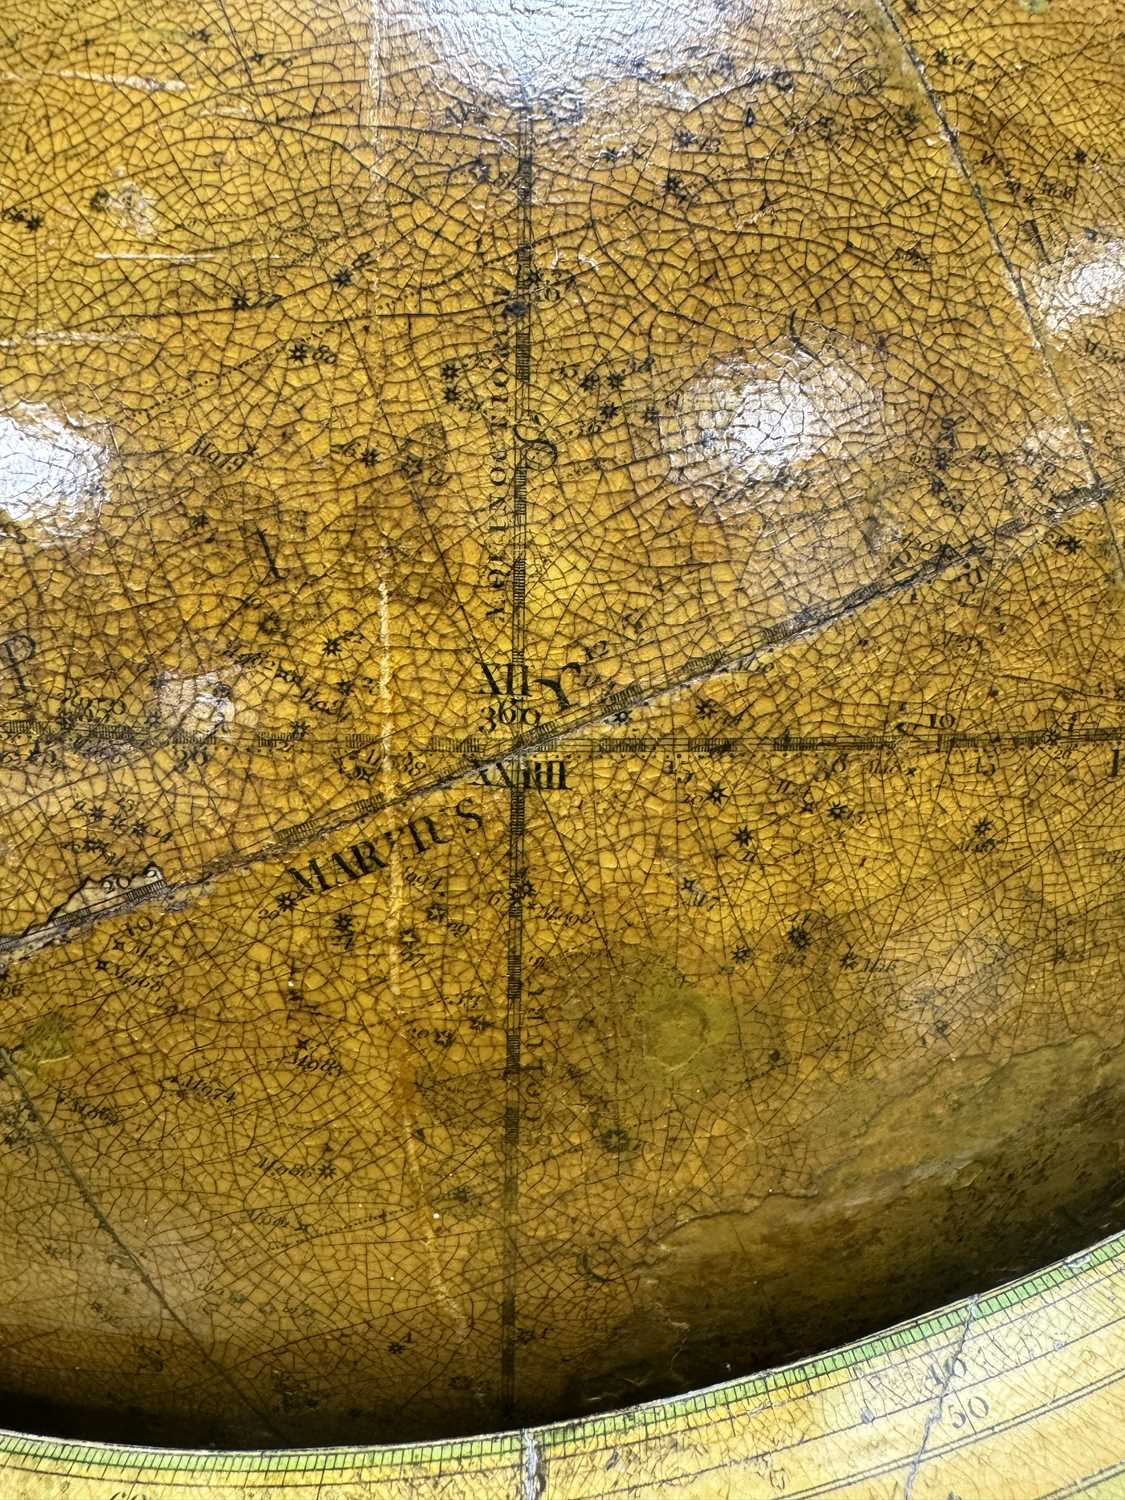 A 19TH CENTURY 15” CARY CELESTIAL LIBRARY GLOBE - Image 13 of 14